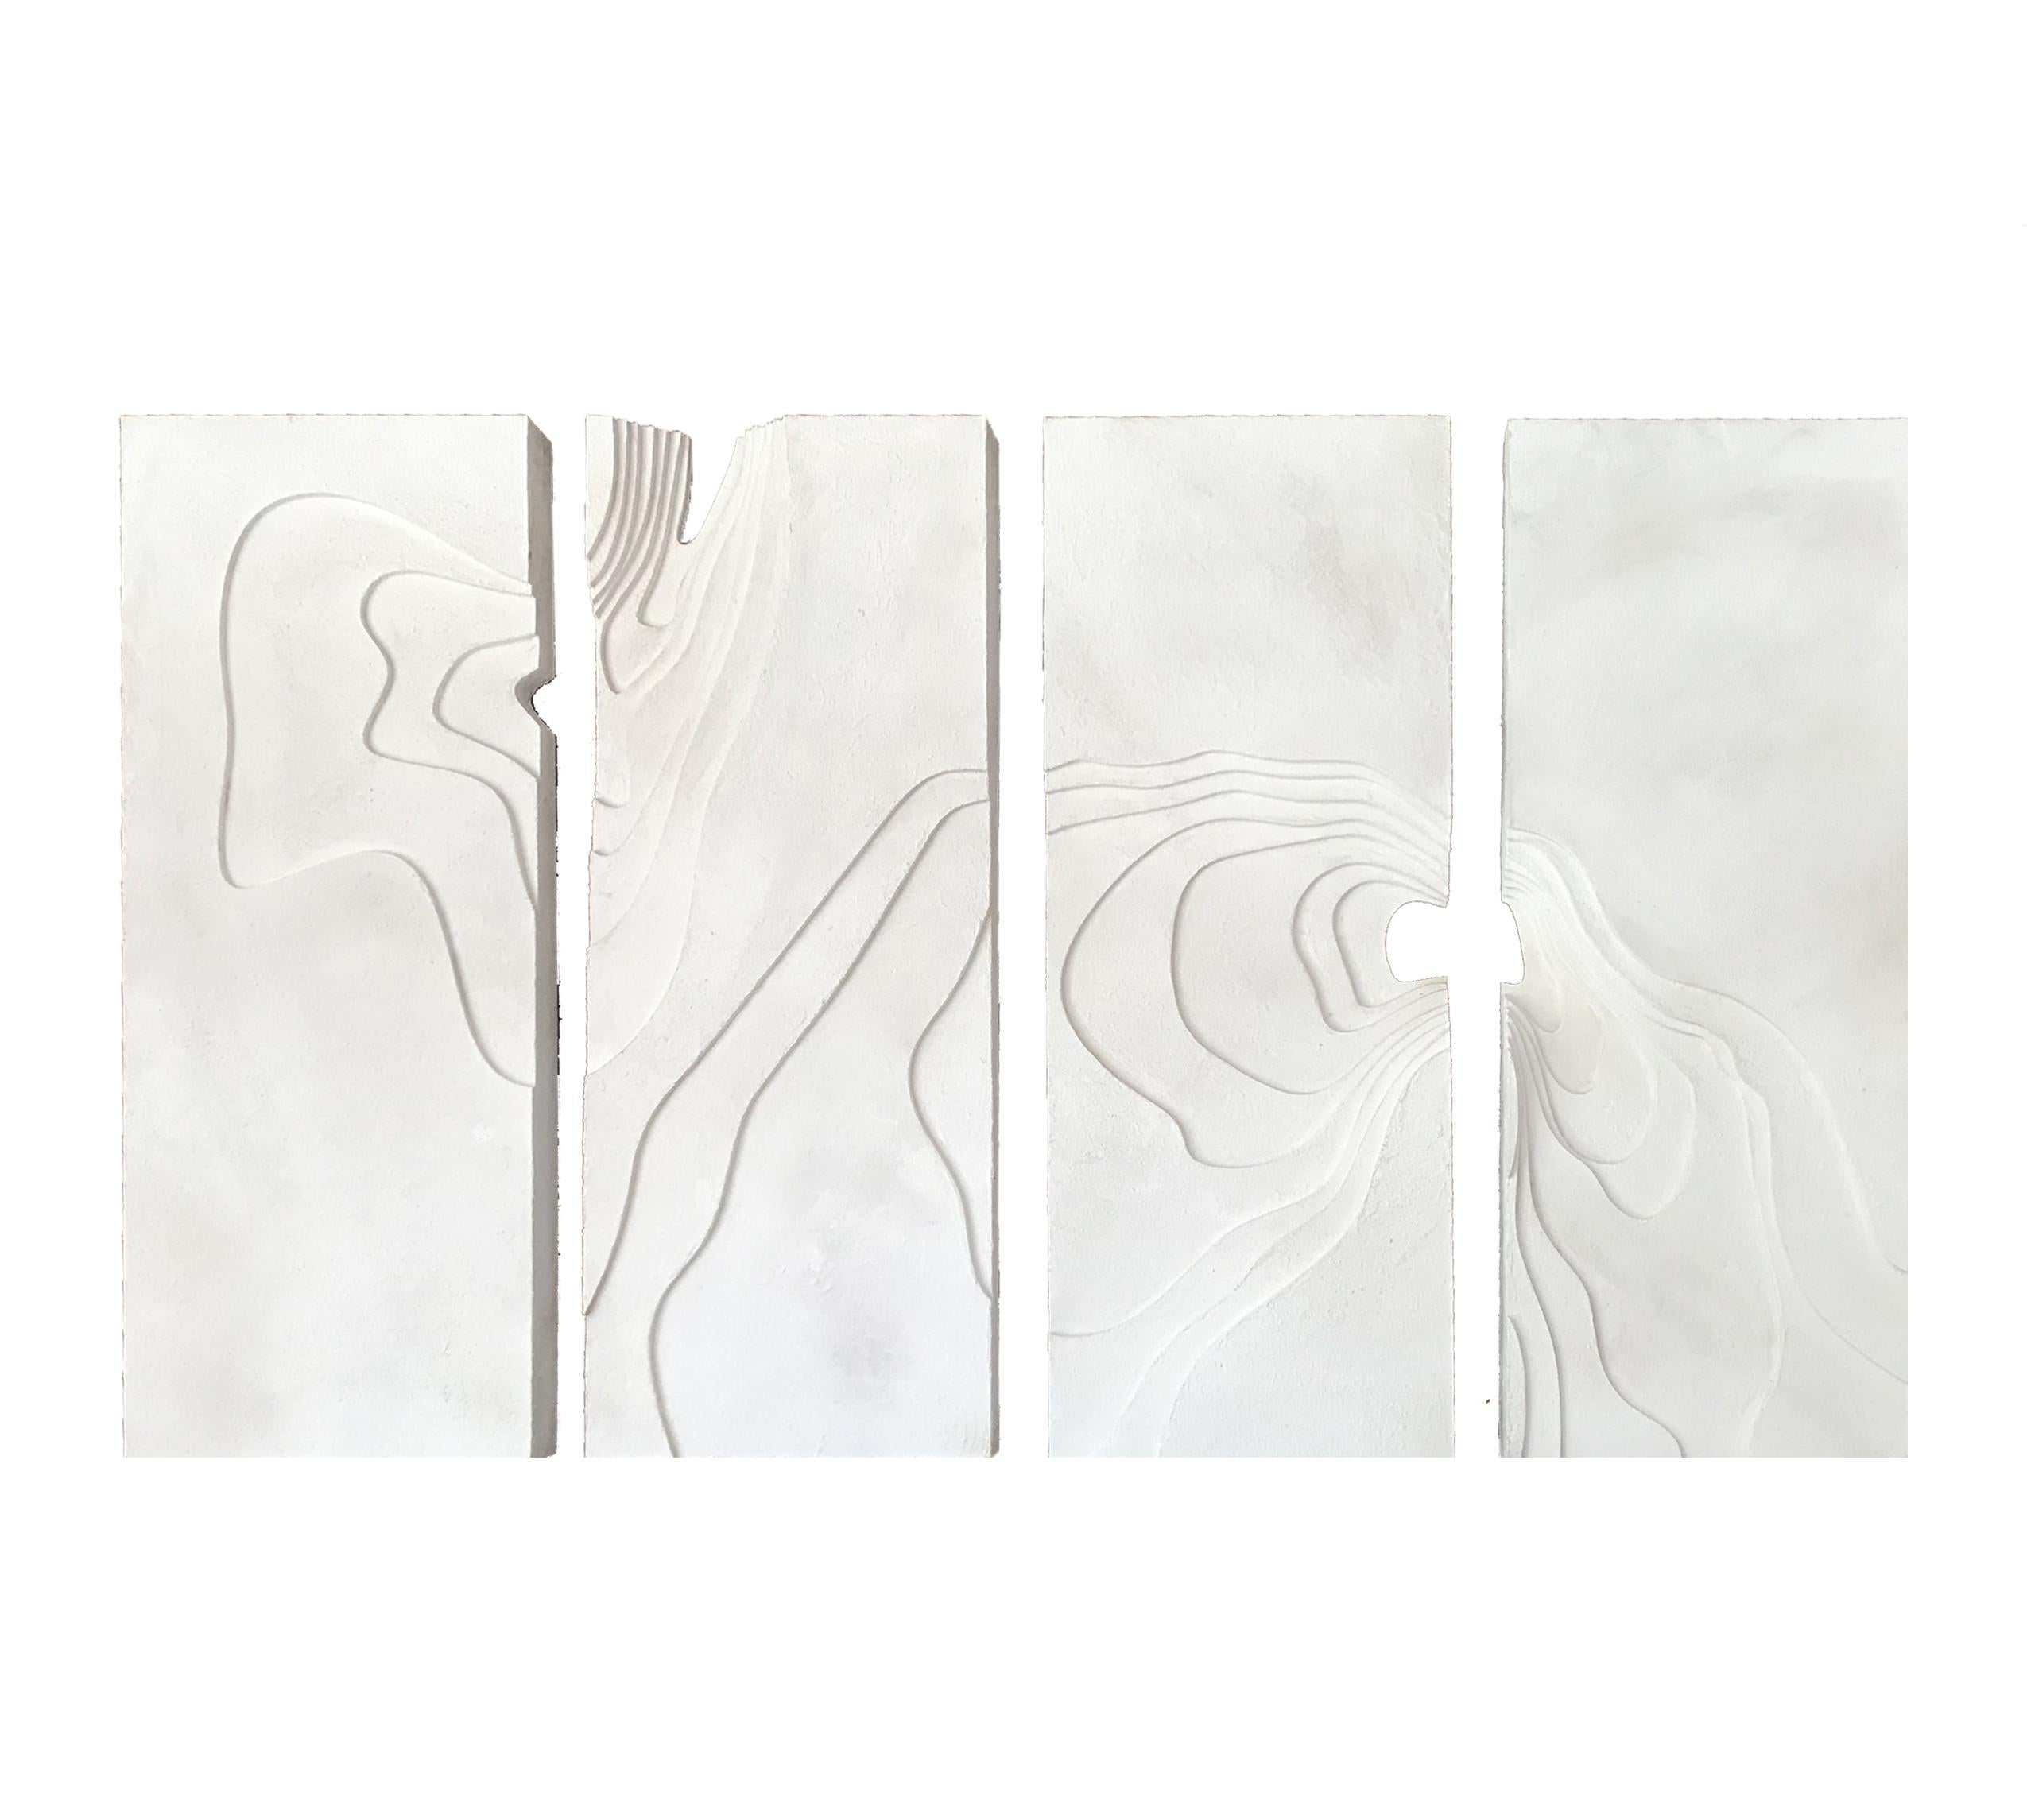 Outstanding Elegant Art Piece for wall hanging: "Techtonic Formations"